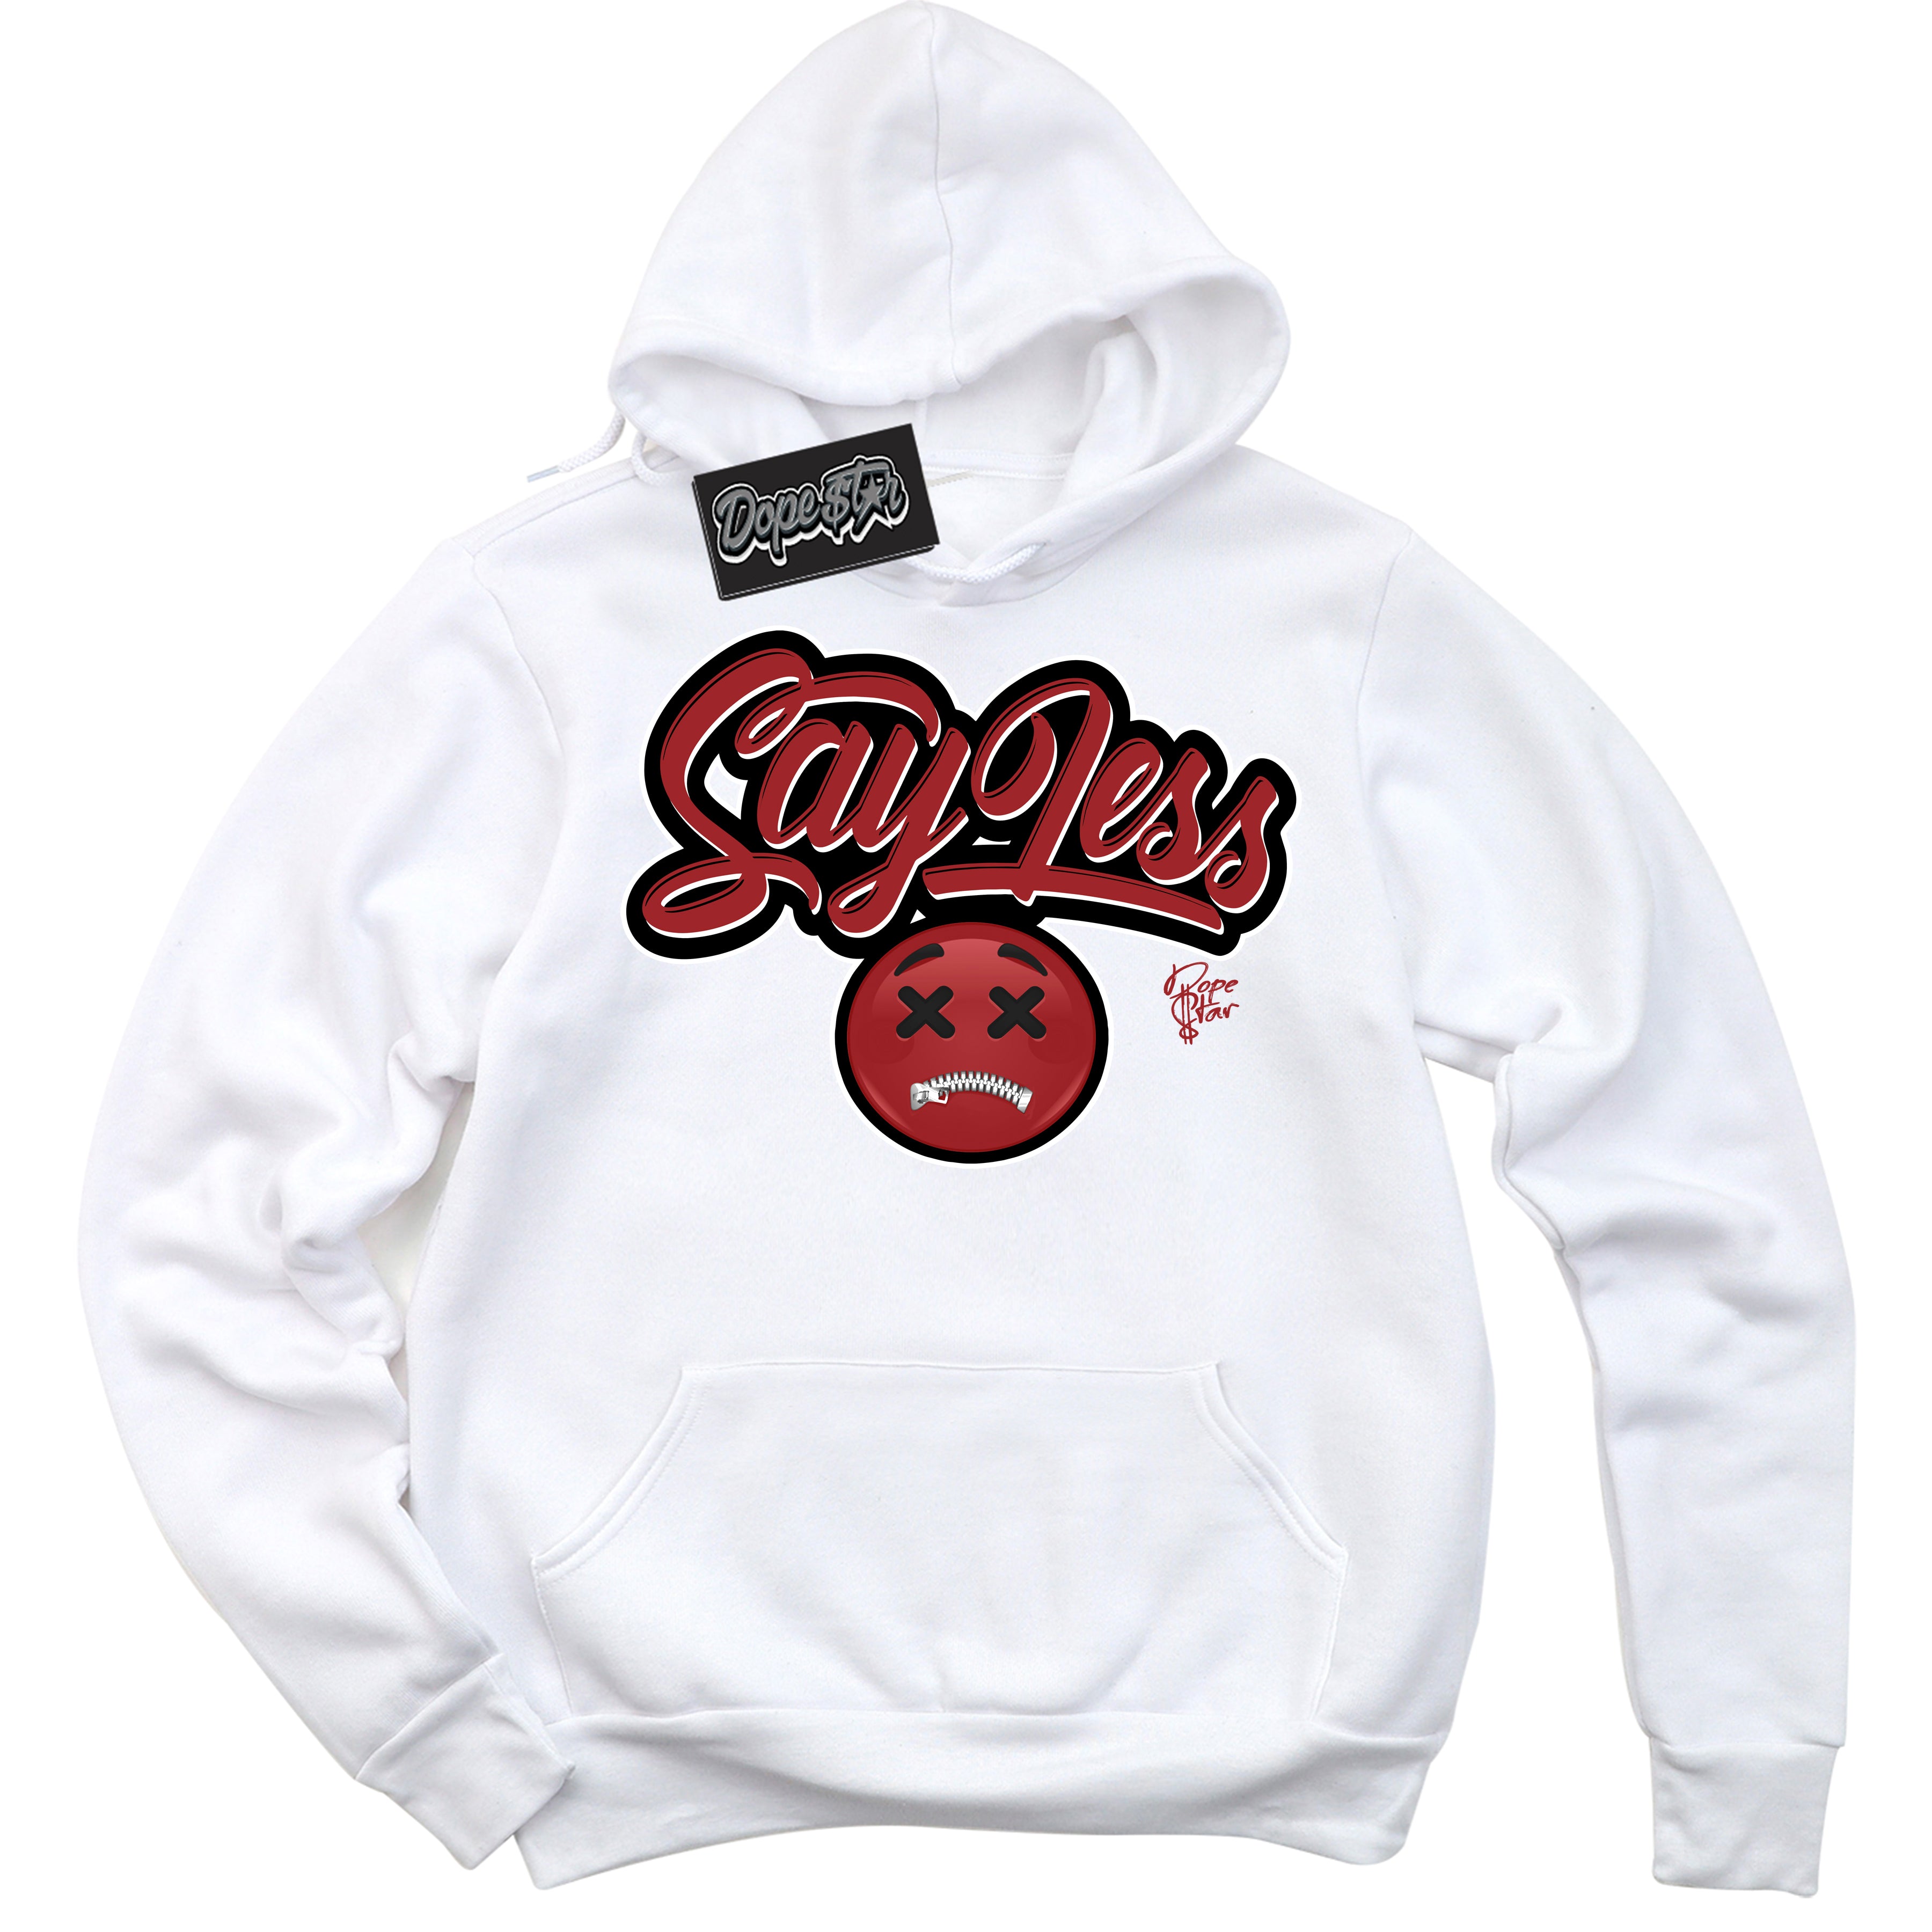 Cool White Hoodie With “ Say Less “  Design That Perfectly Matches Lost And Found 1s Sneakers.